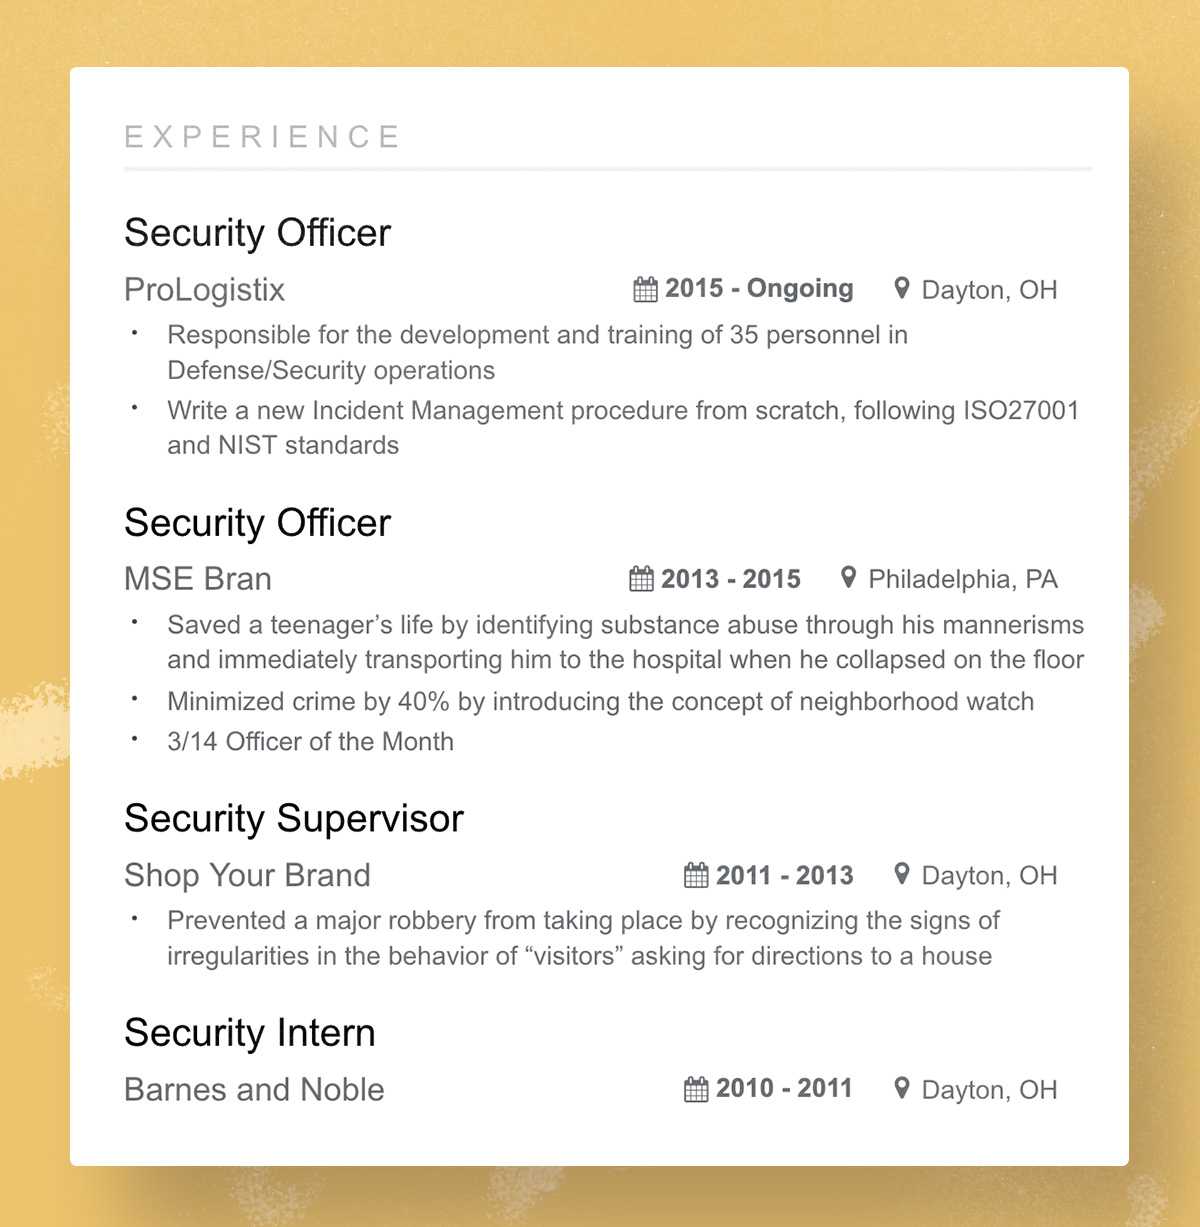 Security Officer resume experience example